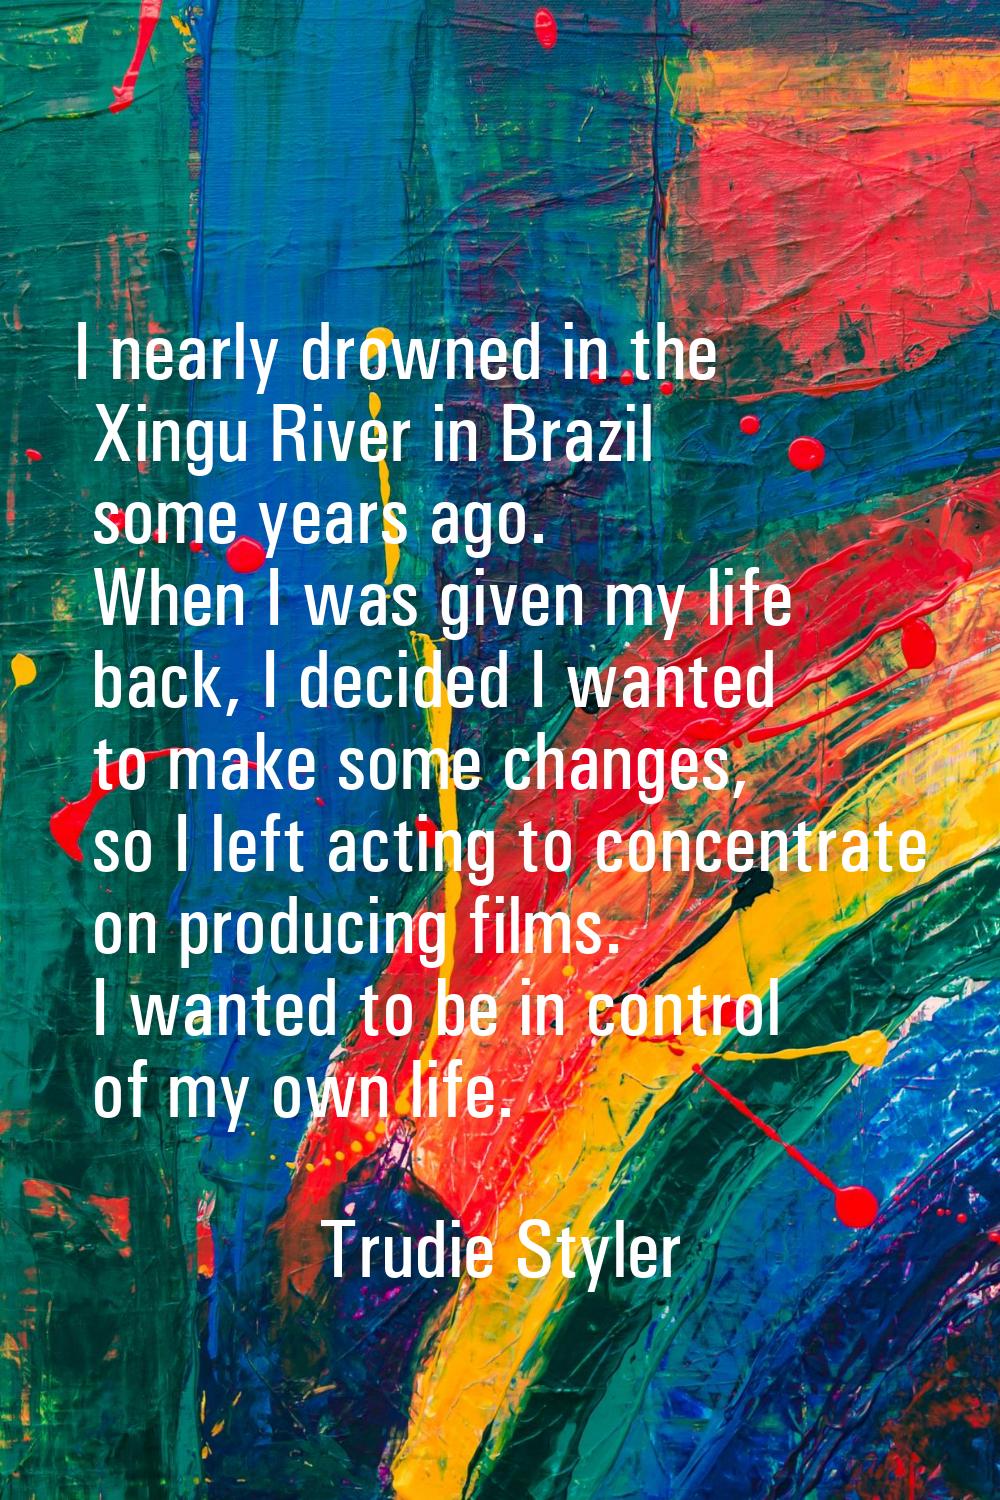 I nearly drowned in the Xingu River in Brazil some years ago. When I was given my life back, I deci